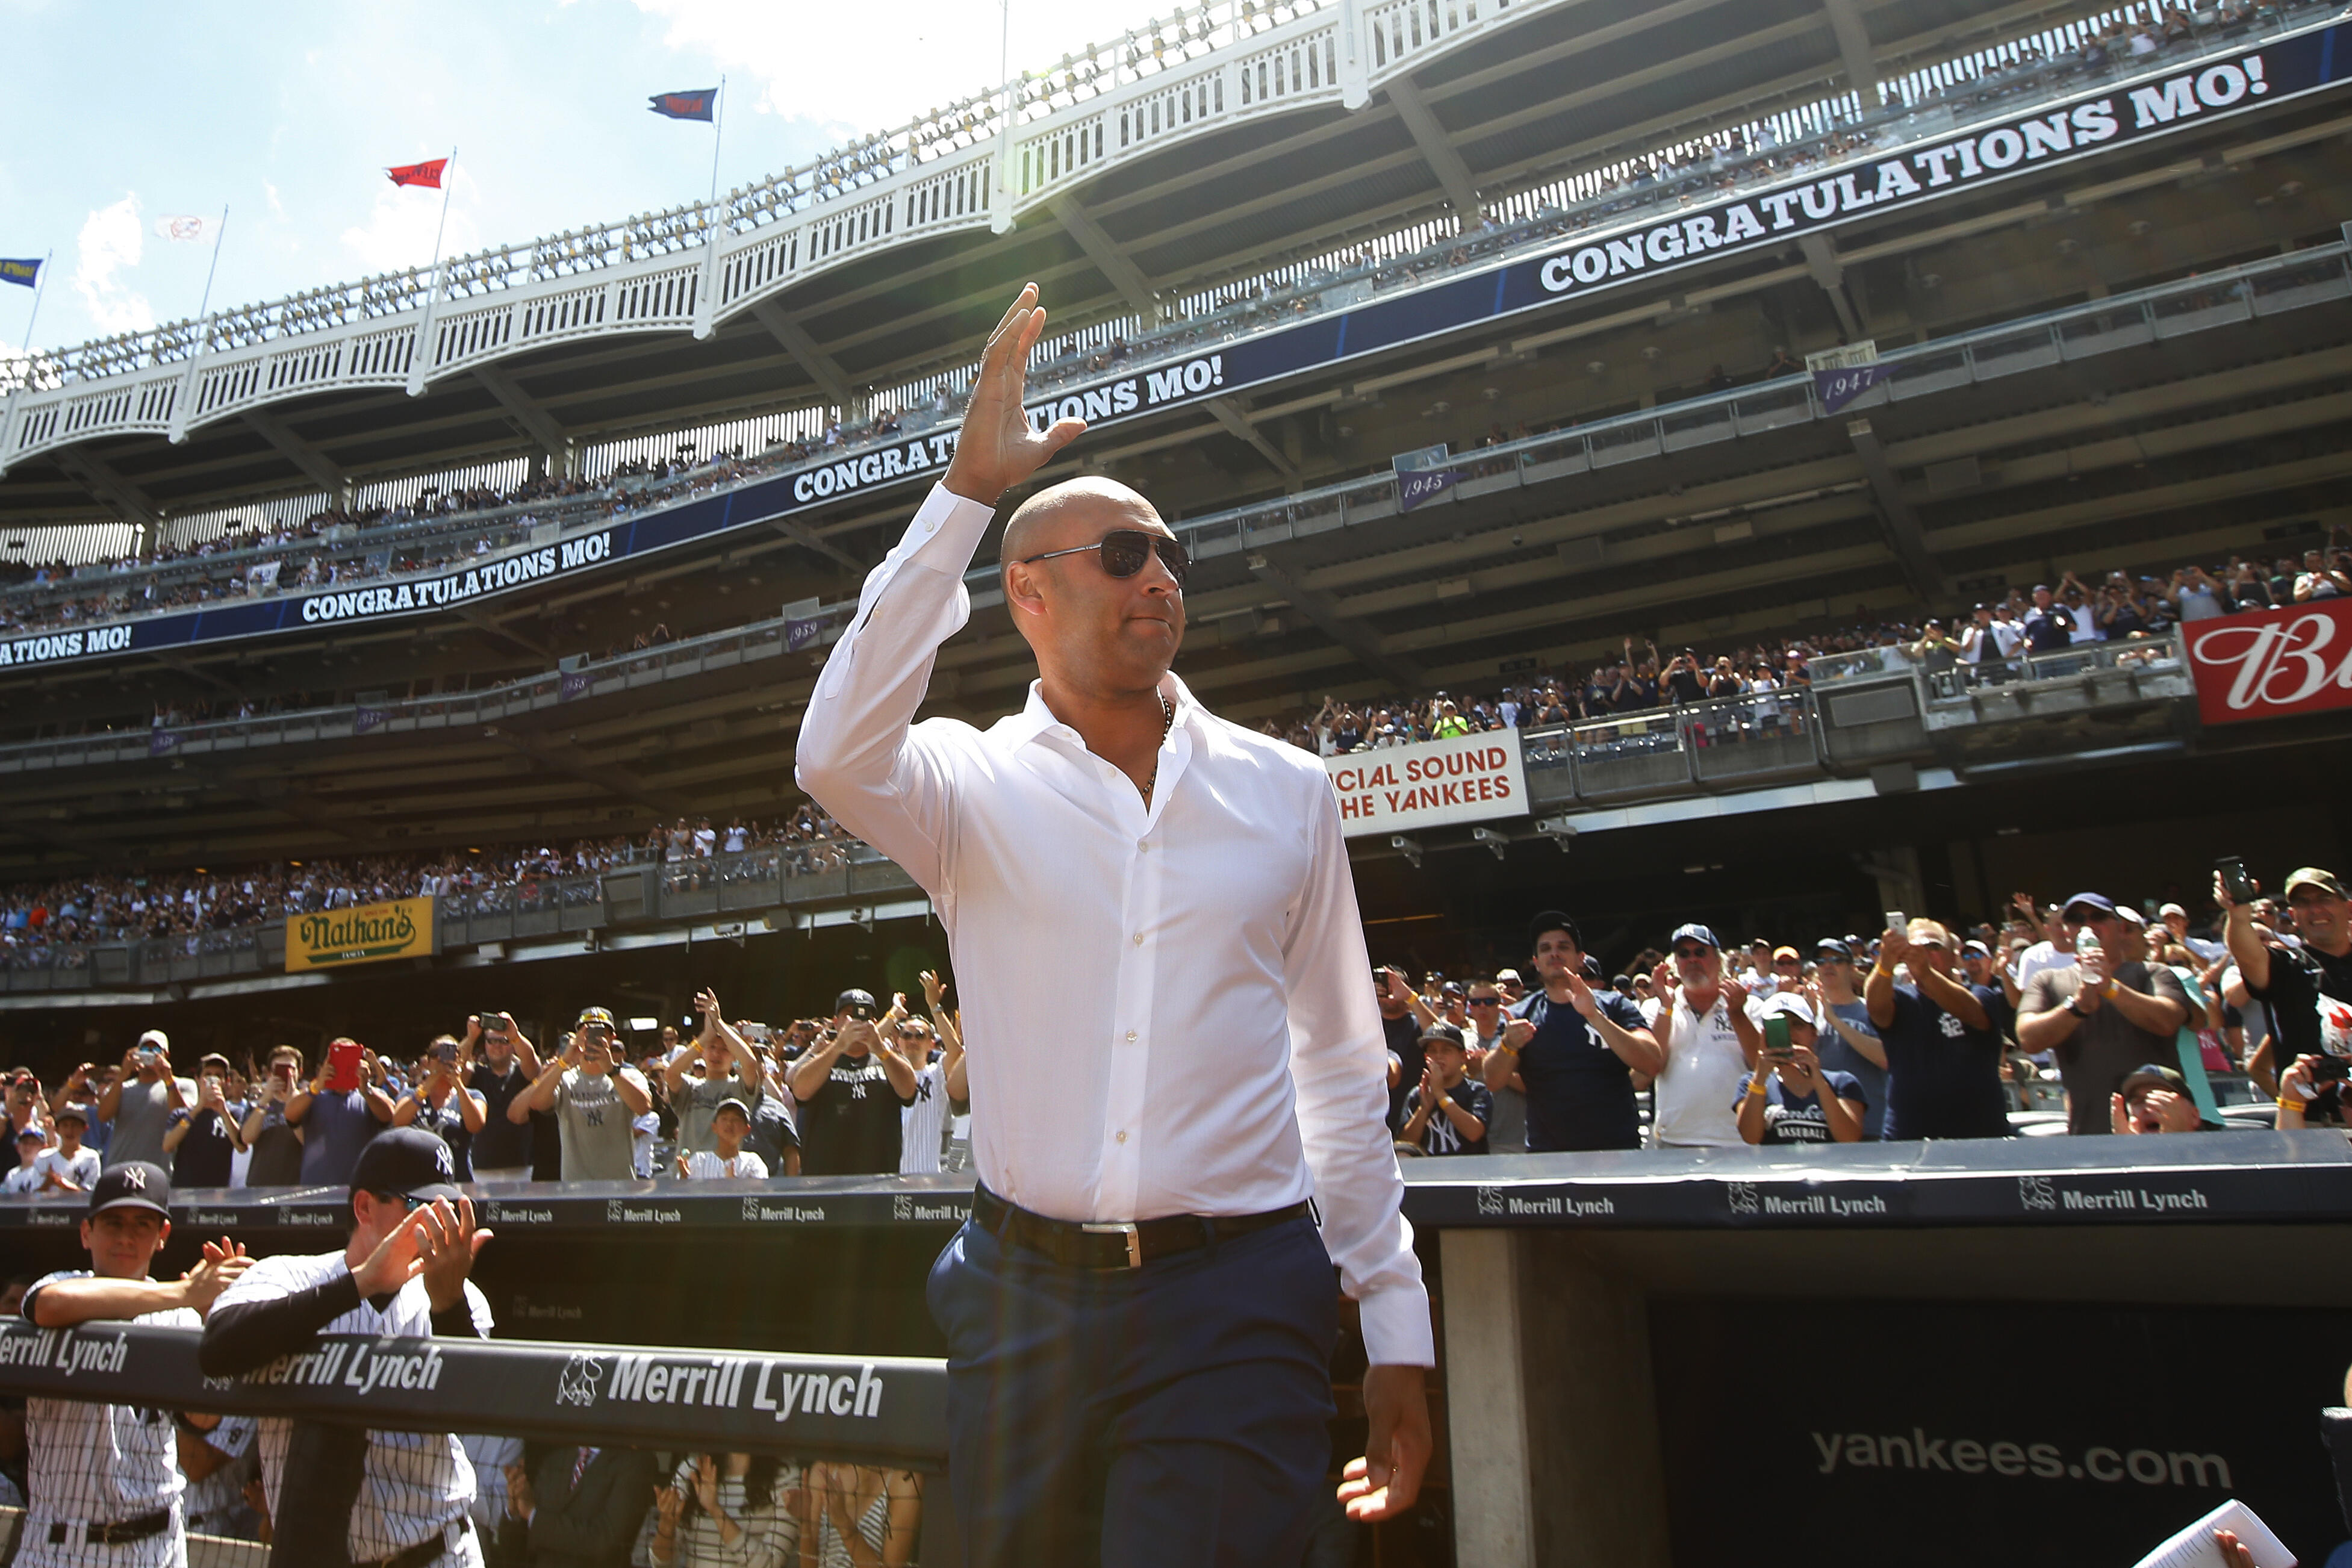 NEW YORK, NY - AUGUST 14: Former New York Yankee Derek Jeter acknowledges the crowd as he is introduced during a ceremony honoring Mariano Rivera before a game between the Tampa Bay Rays and the New York Yankees at Yankee Stadium on August 14,  in the Bro